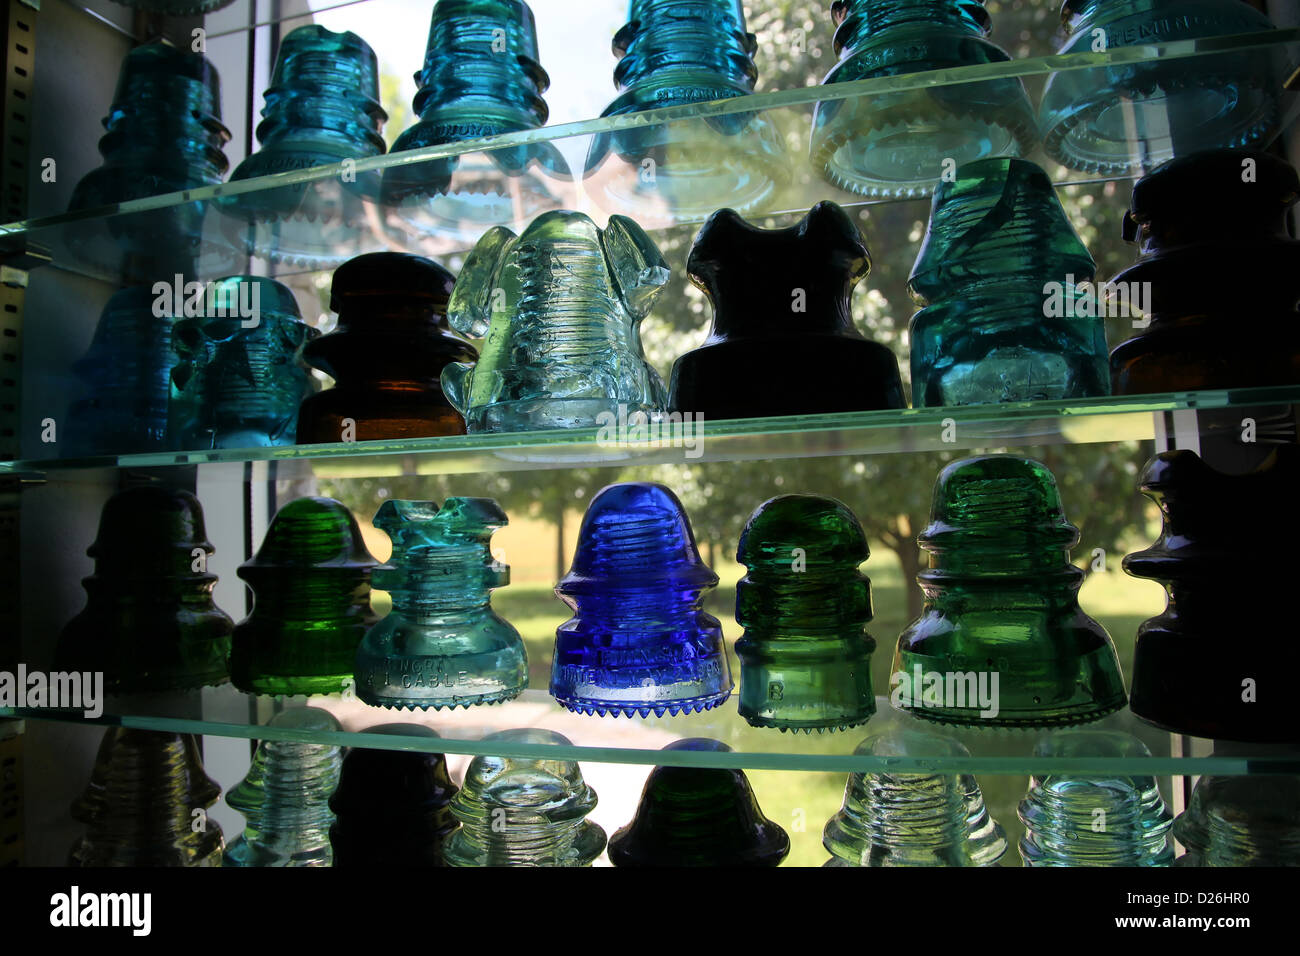 Blue glass insulator in collection Stock Photo